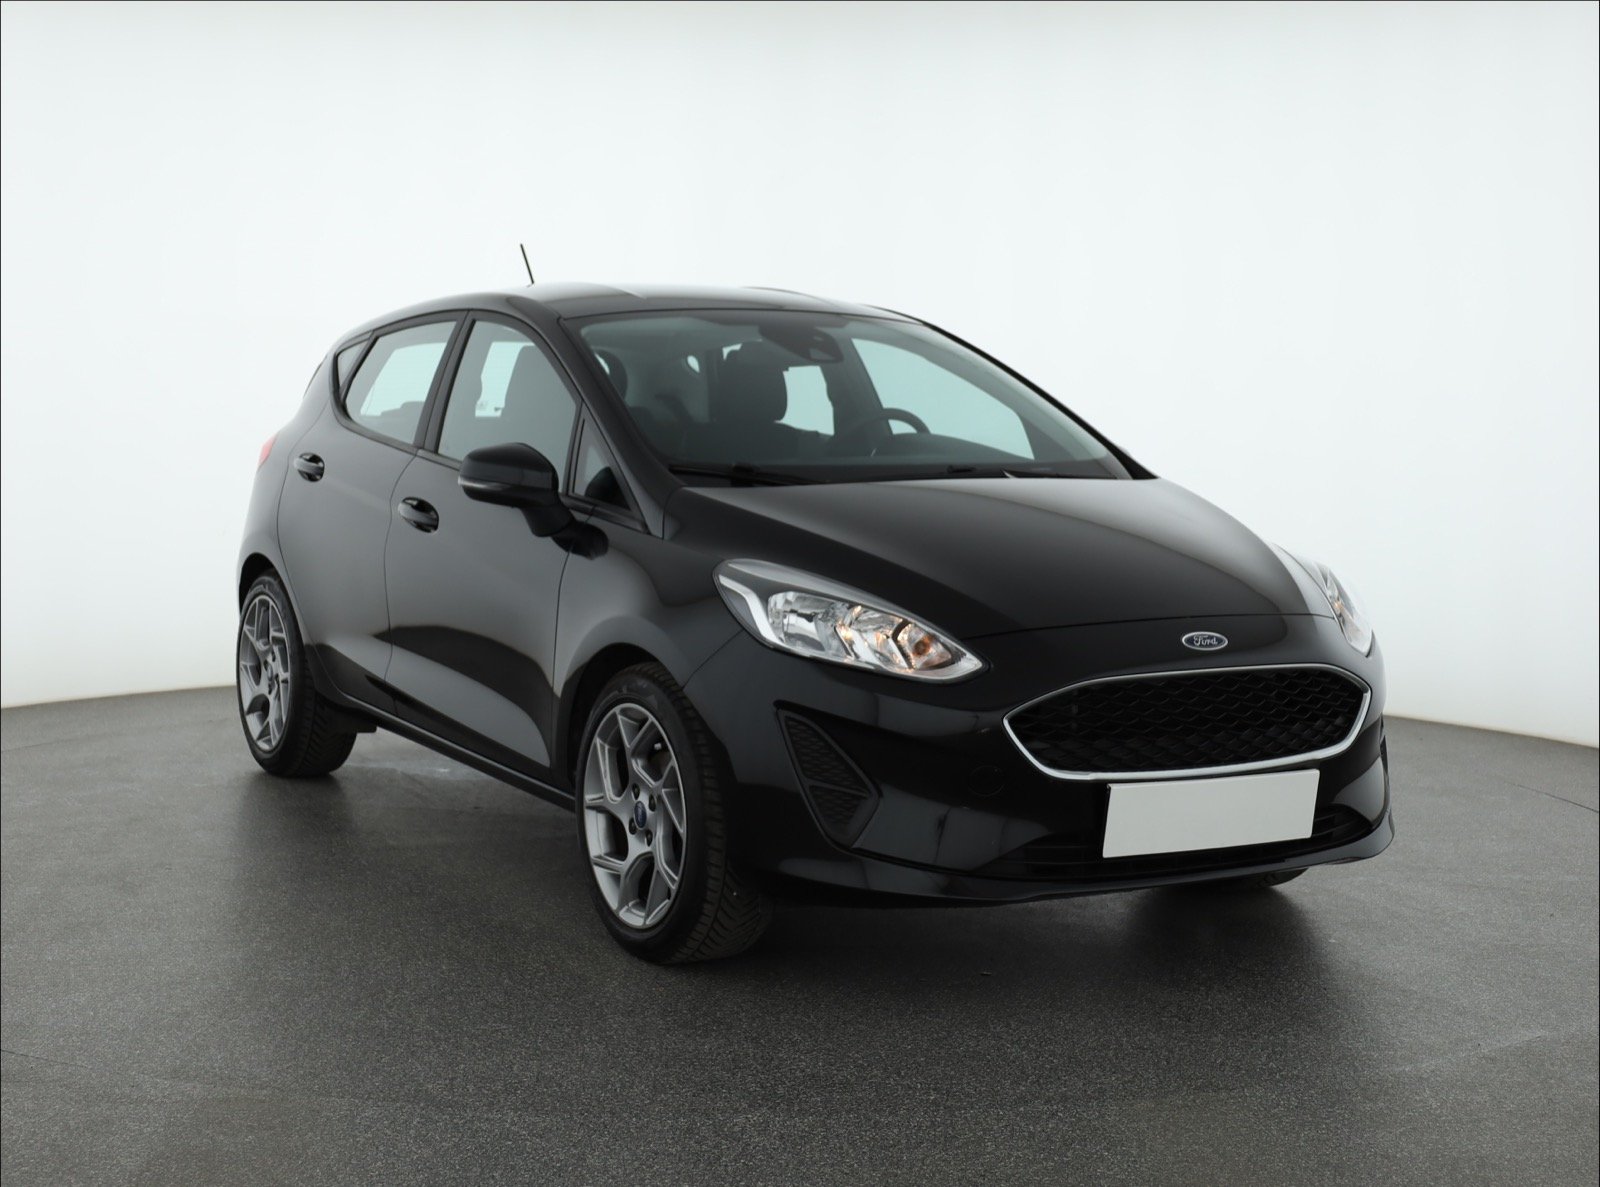 Ford Fiesta 1.1 Duratec Ti-VCT Hatchback 2017 - 1